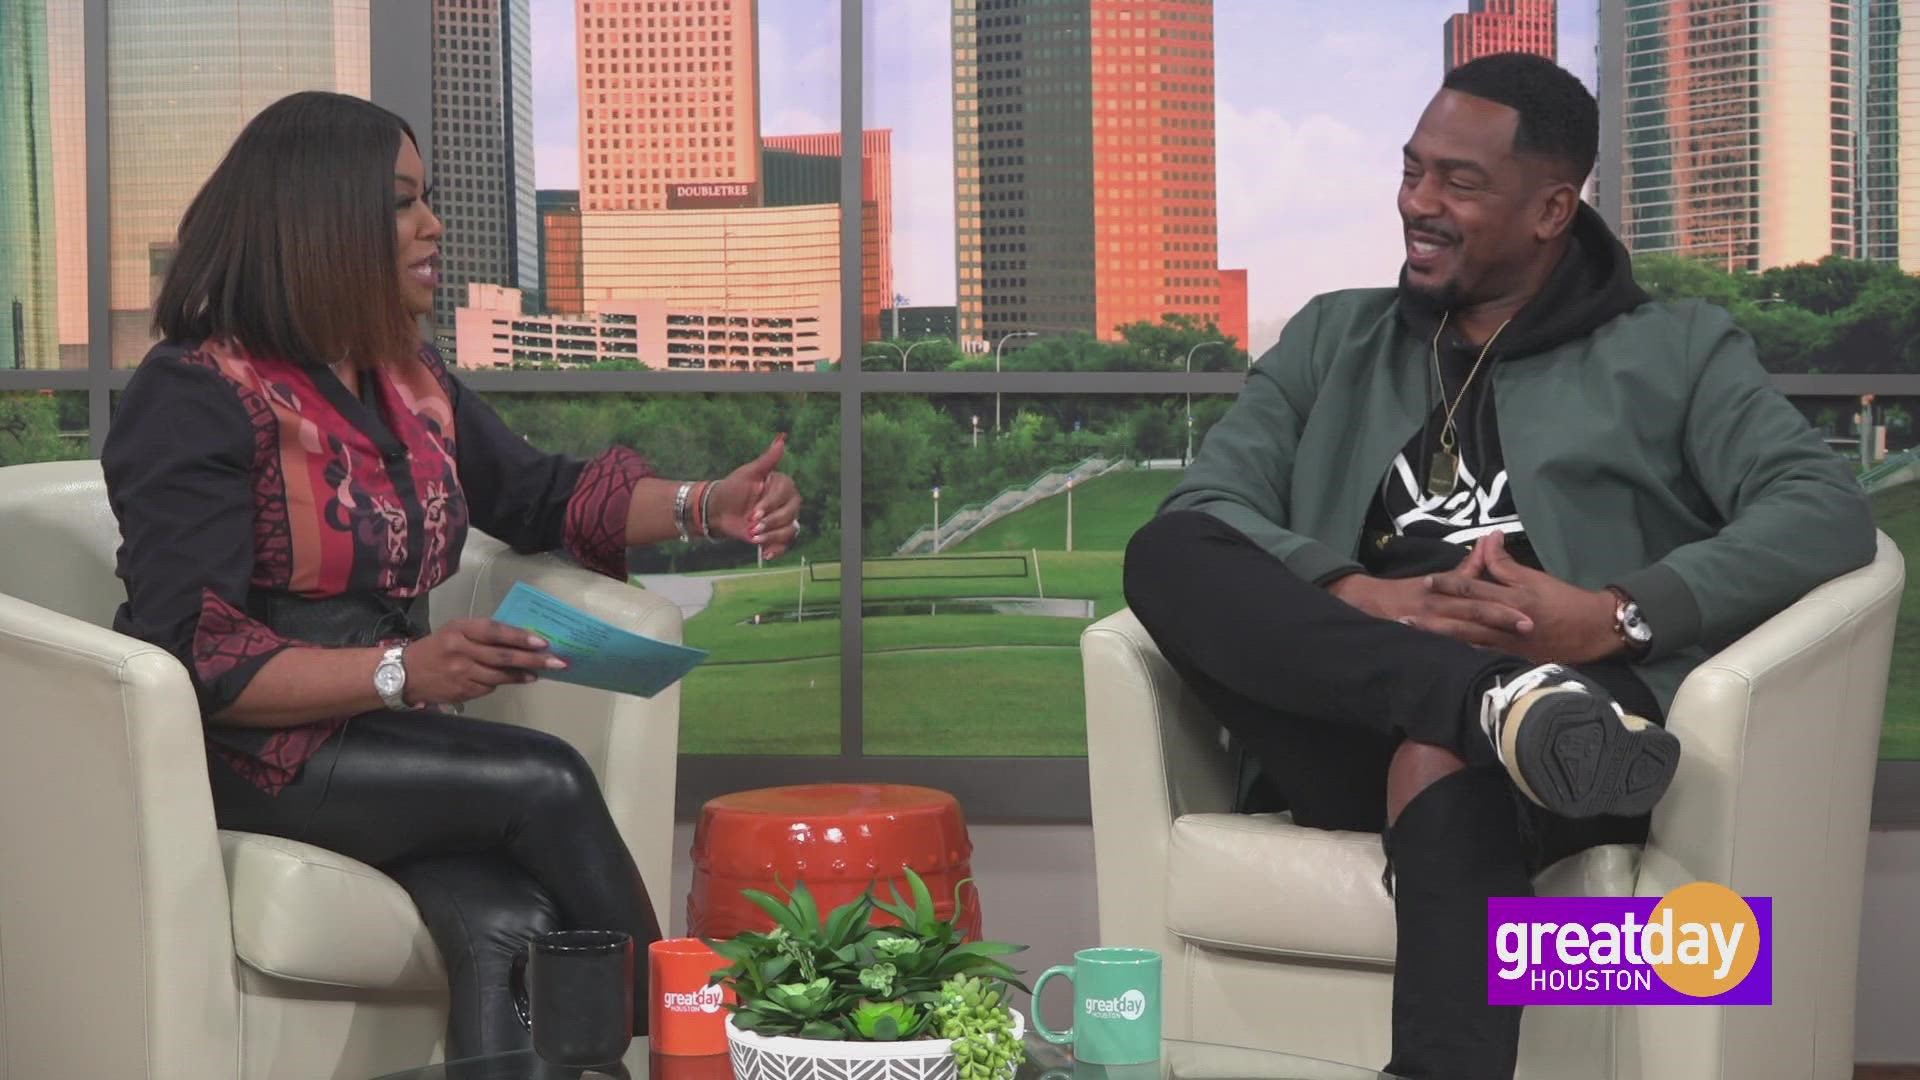 Bill Bellamy is revving up for his new comedy